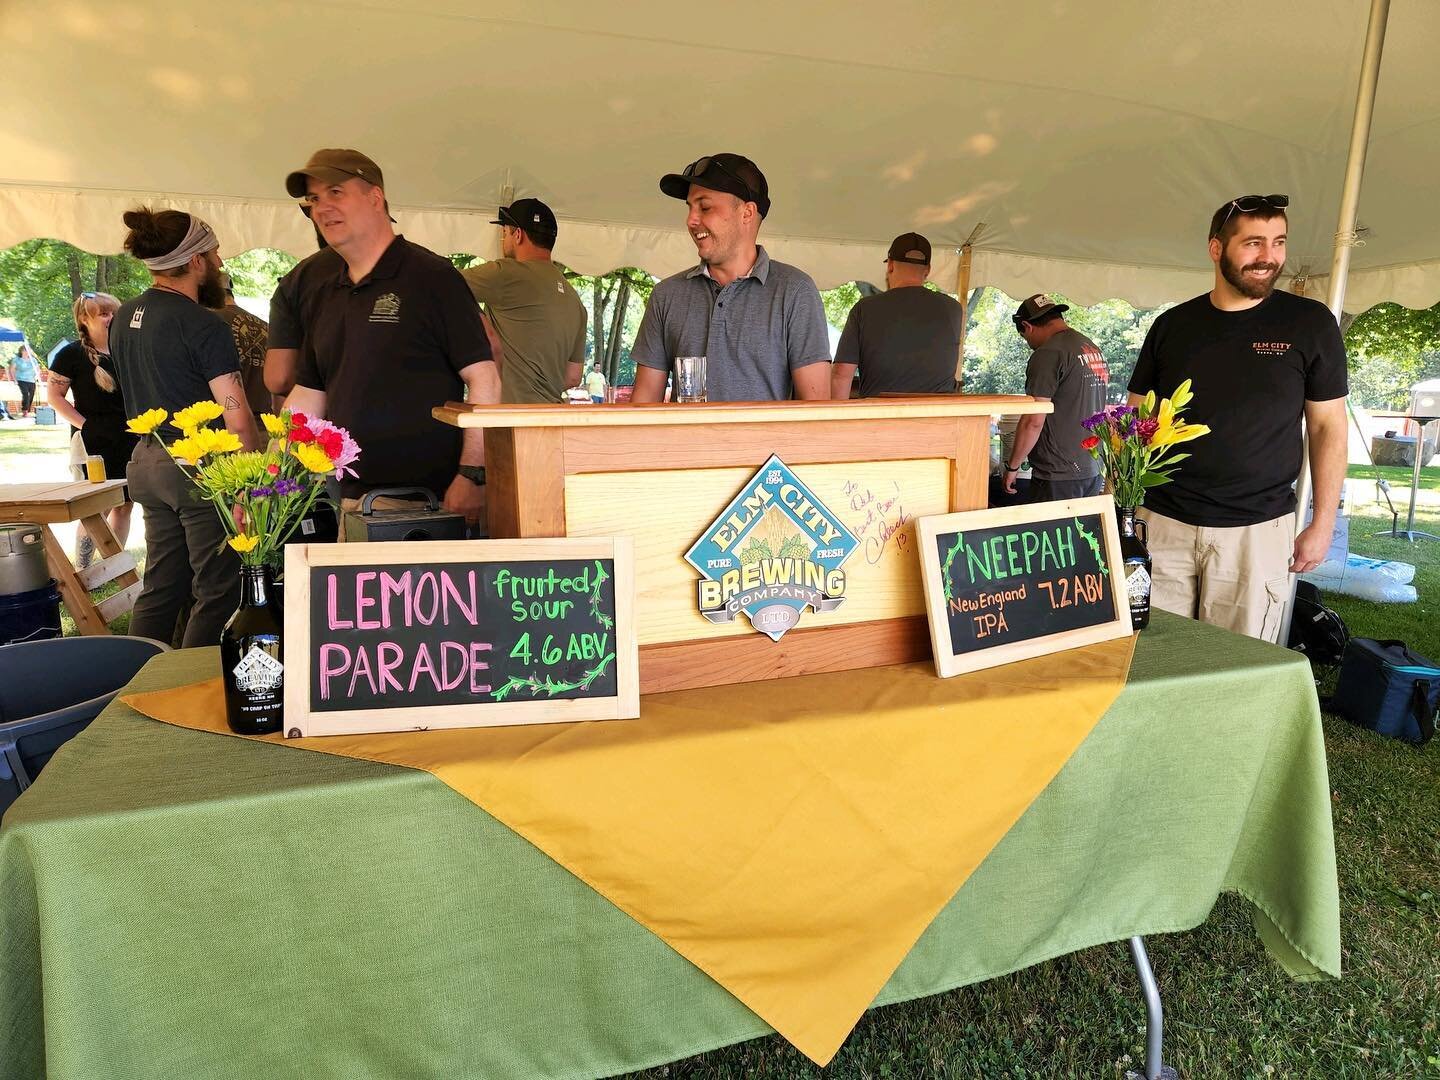 The Keep NH Brewing Fest is starting! Tell us your favorite: Lemon Parade or NEEPAH?